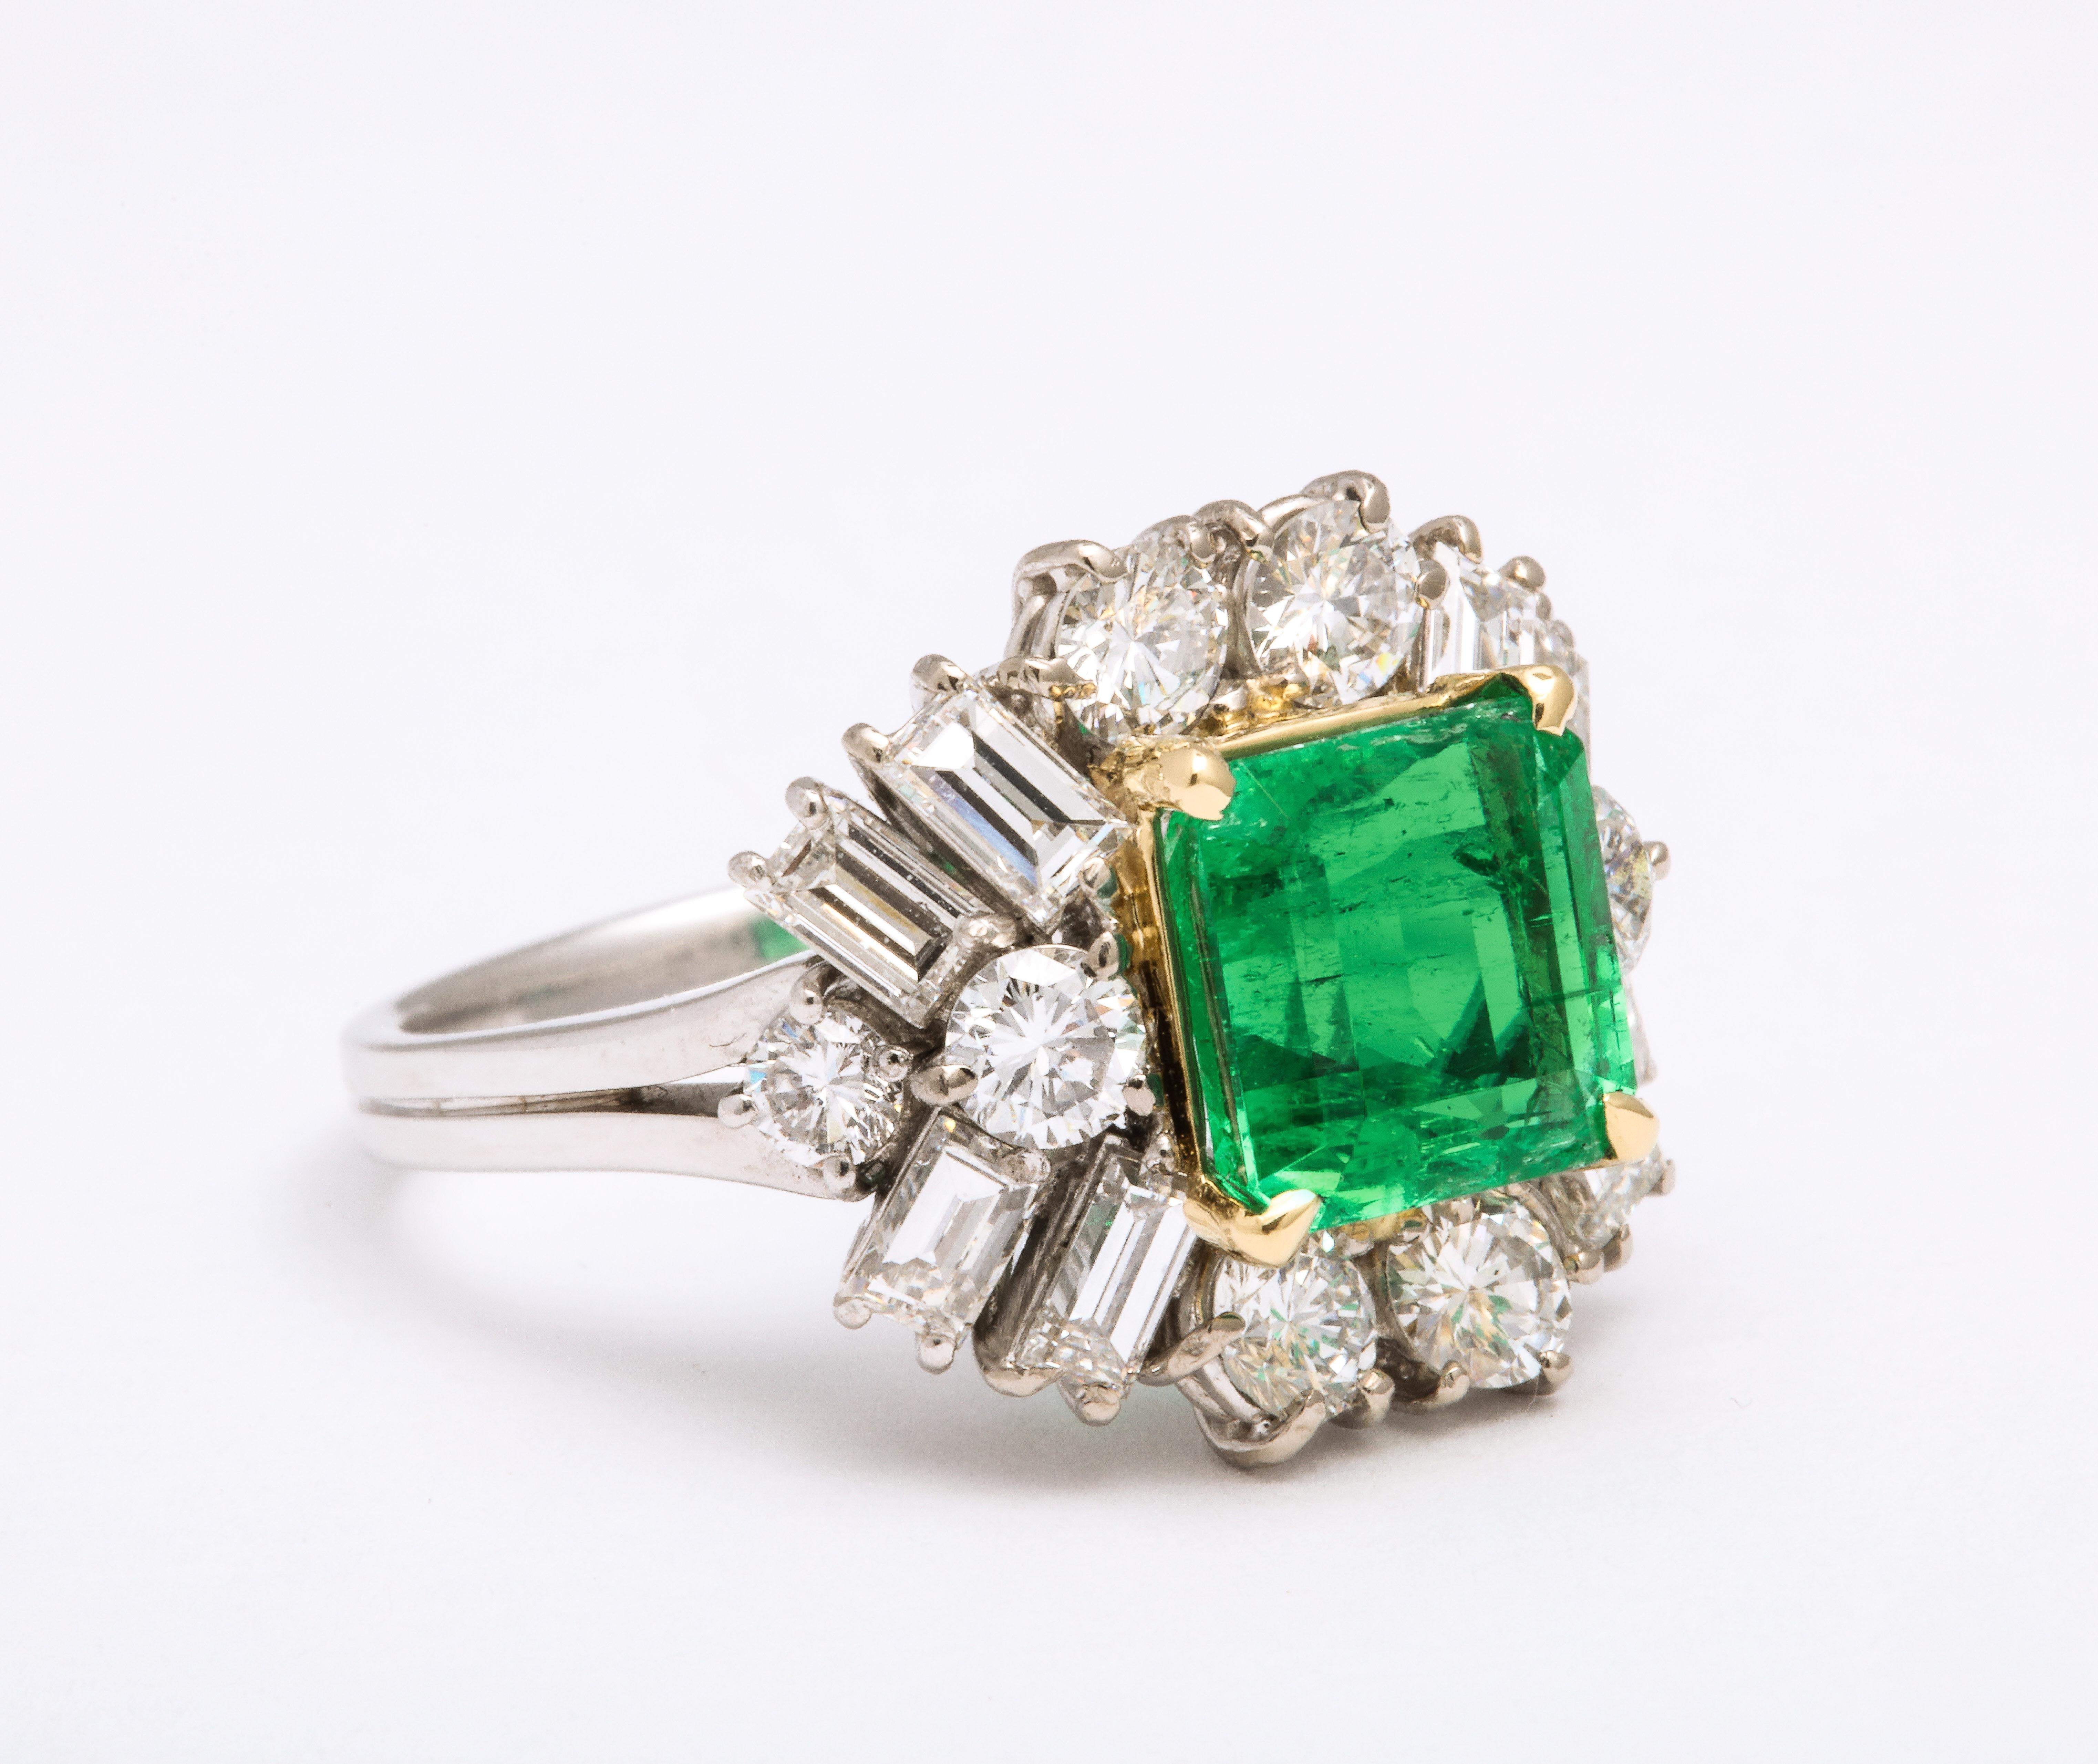 Emerald Diamond Platinum Ring, circa 2000. In the center is a 1.25 cts tw square cut emerald surrounded by fine white baguette and full cut diamonds. Size 6 1/2.

Materials:
Platinum 4.1 dwt

Stones:
Square cut emerald 1.25 cts tw
Fine white